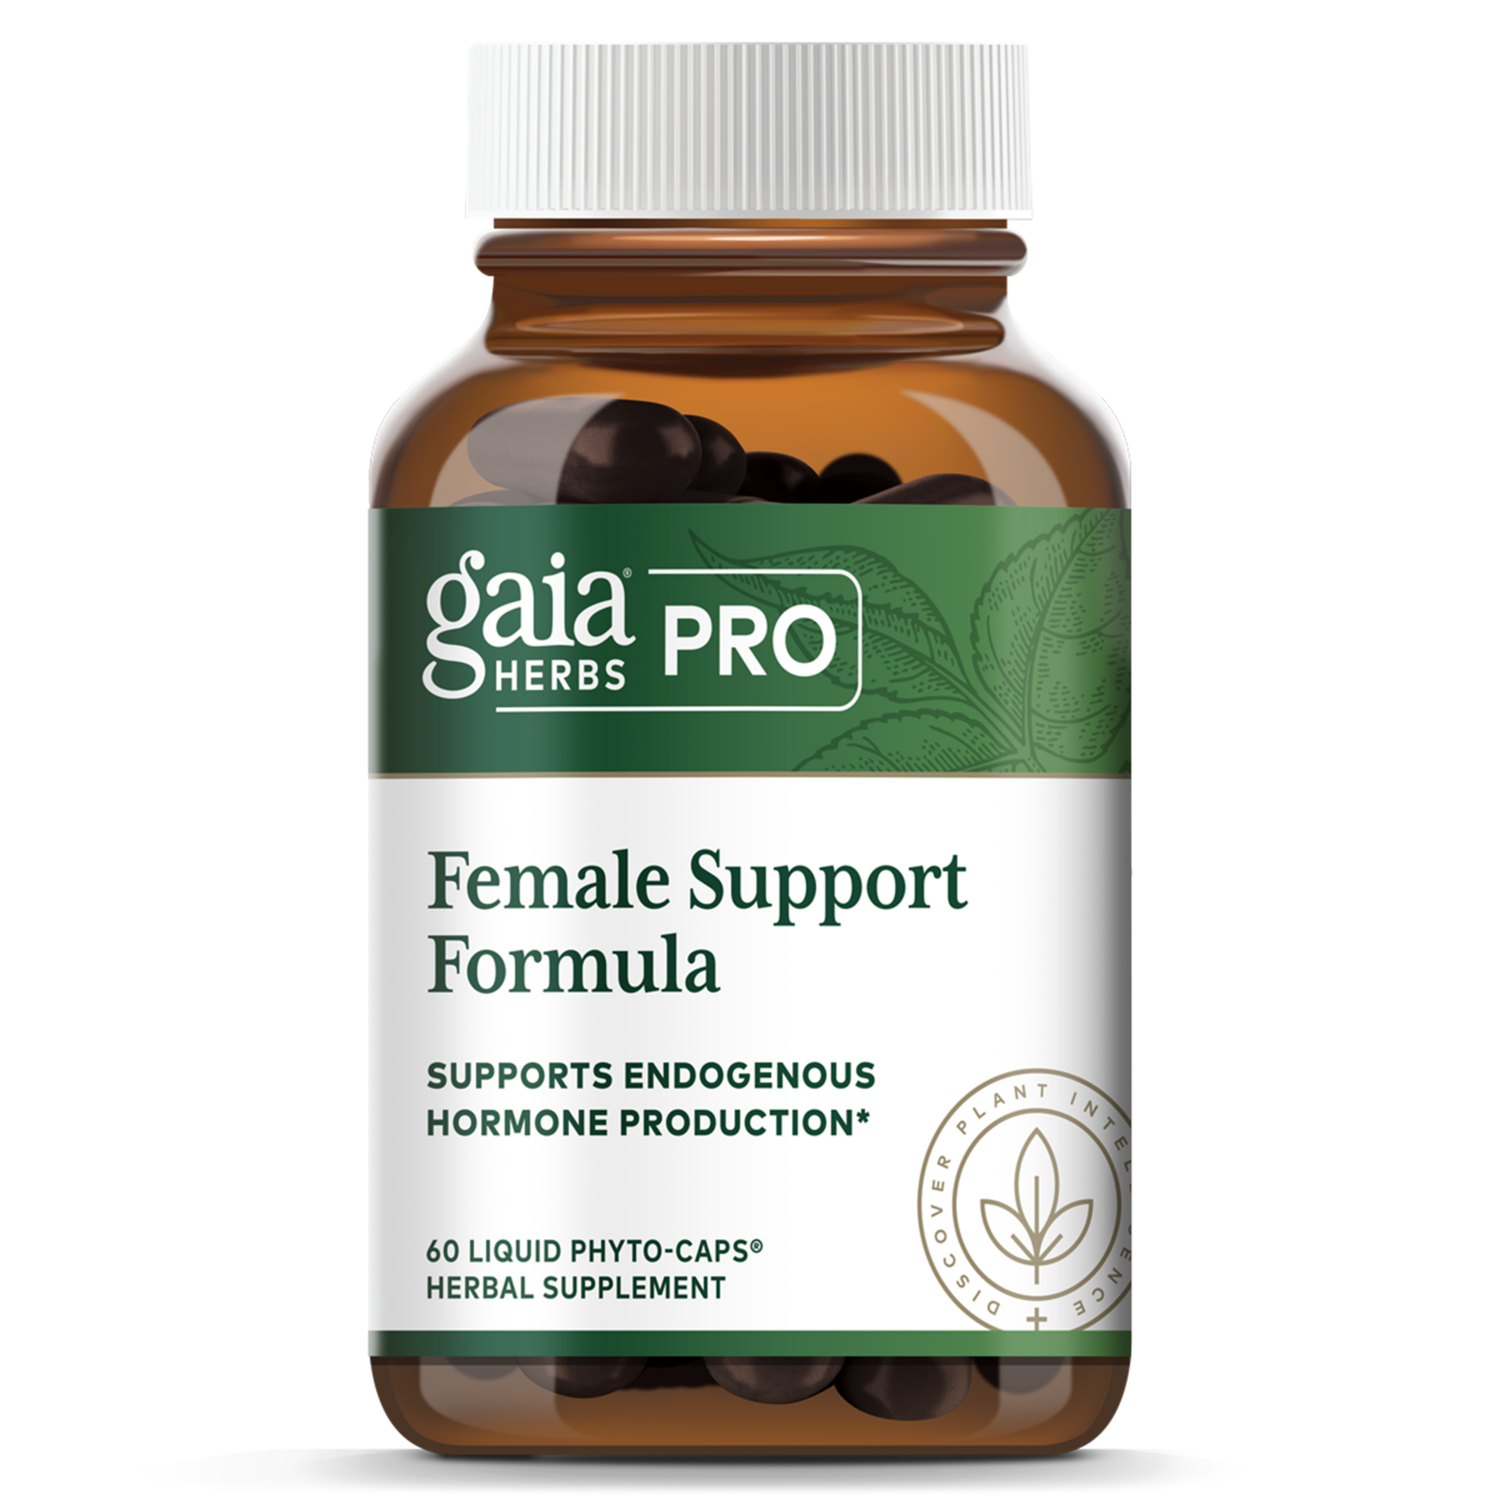 Female Support Formula Phyto-Caps 60 ct GAIA HERBS